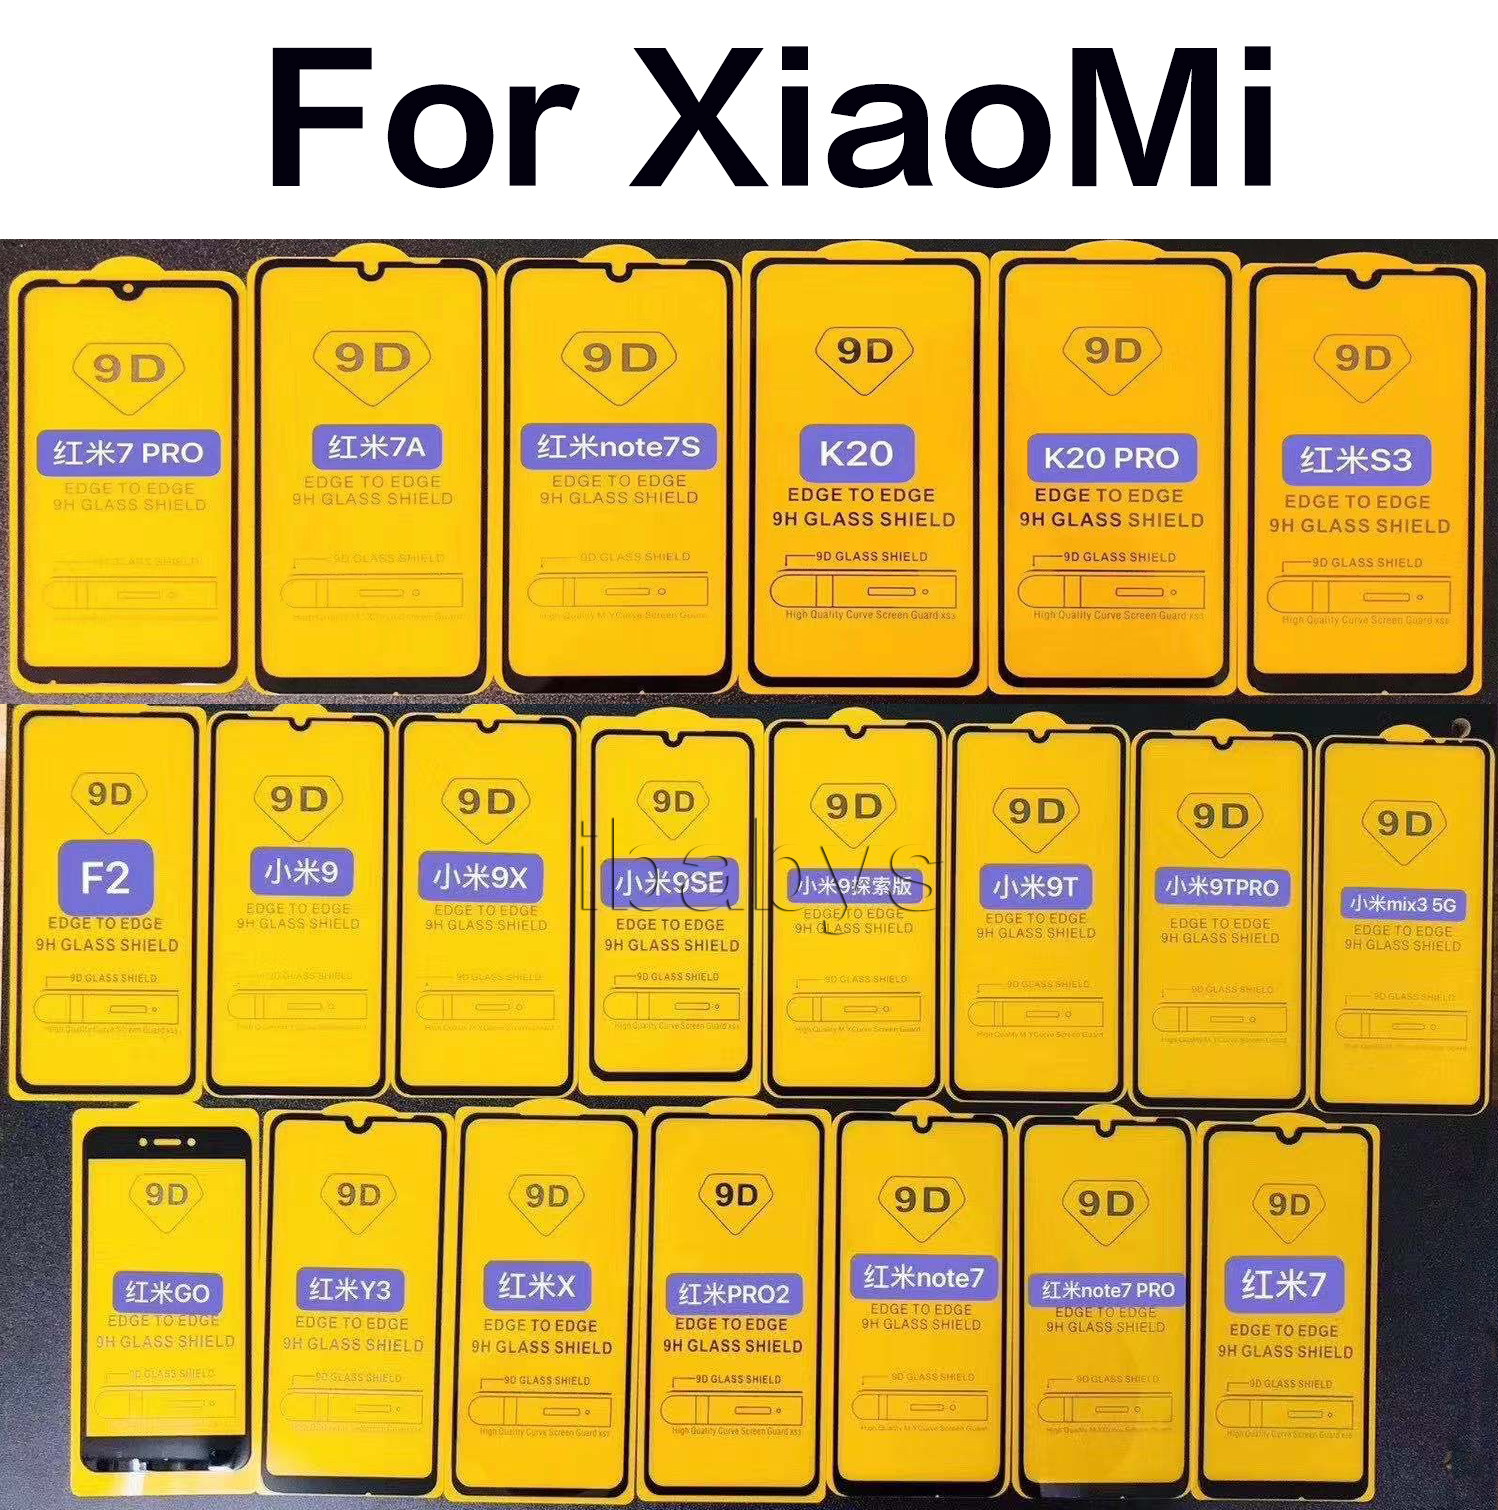 

For XIAOMI 9 9X 9SE 9T Redmi X Note 7 Y3 4X NOTE 4 5 6 7 8 New 9D Full Cover Glue cell phone Tempered Glass screen protector